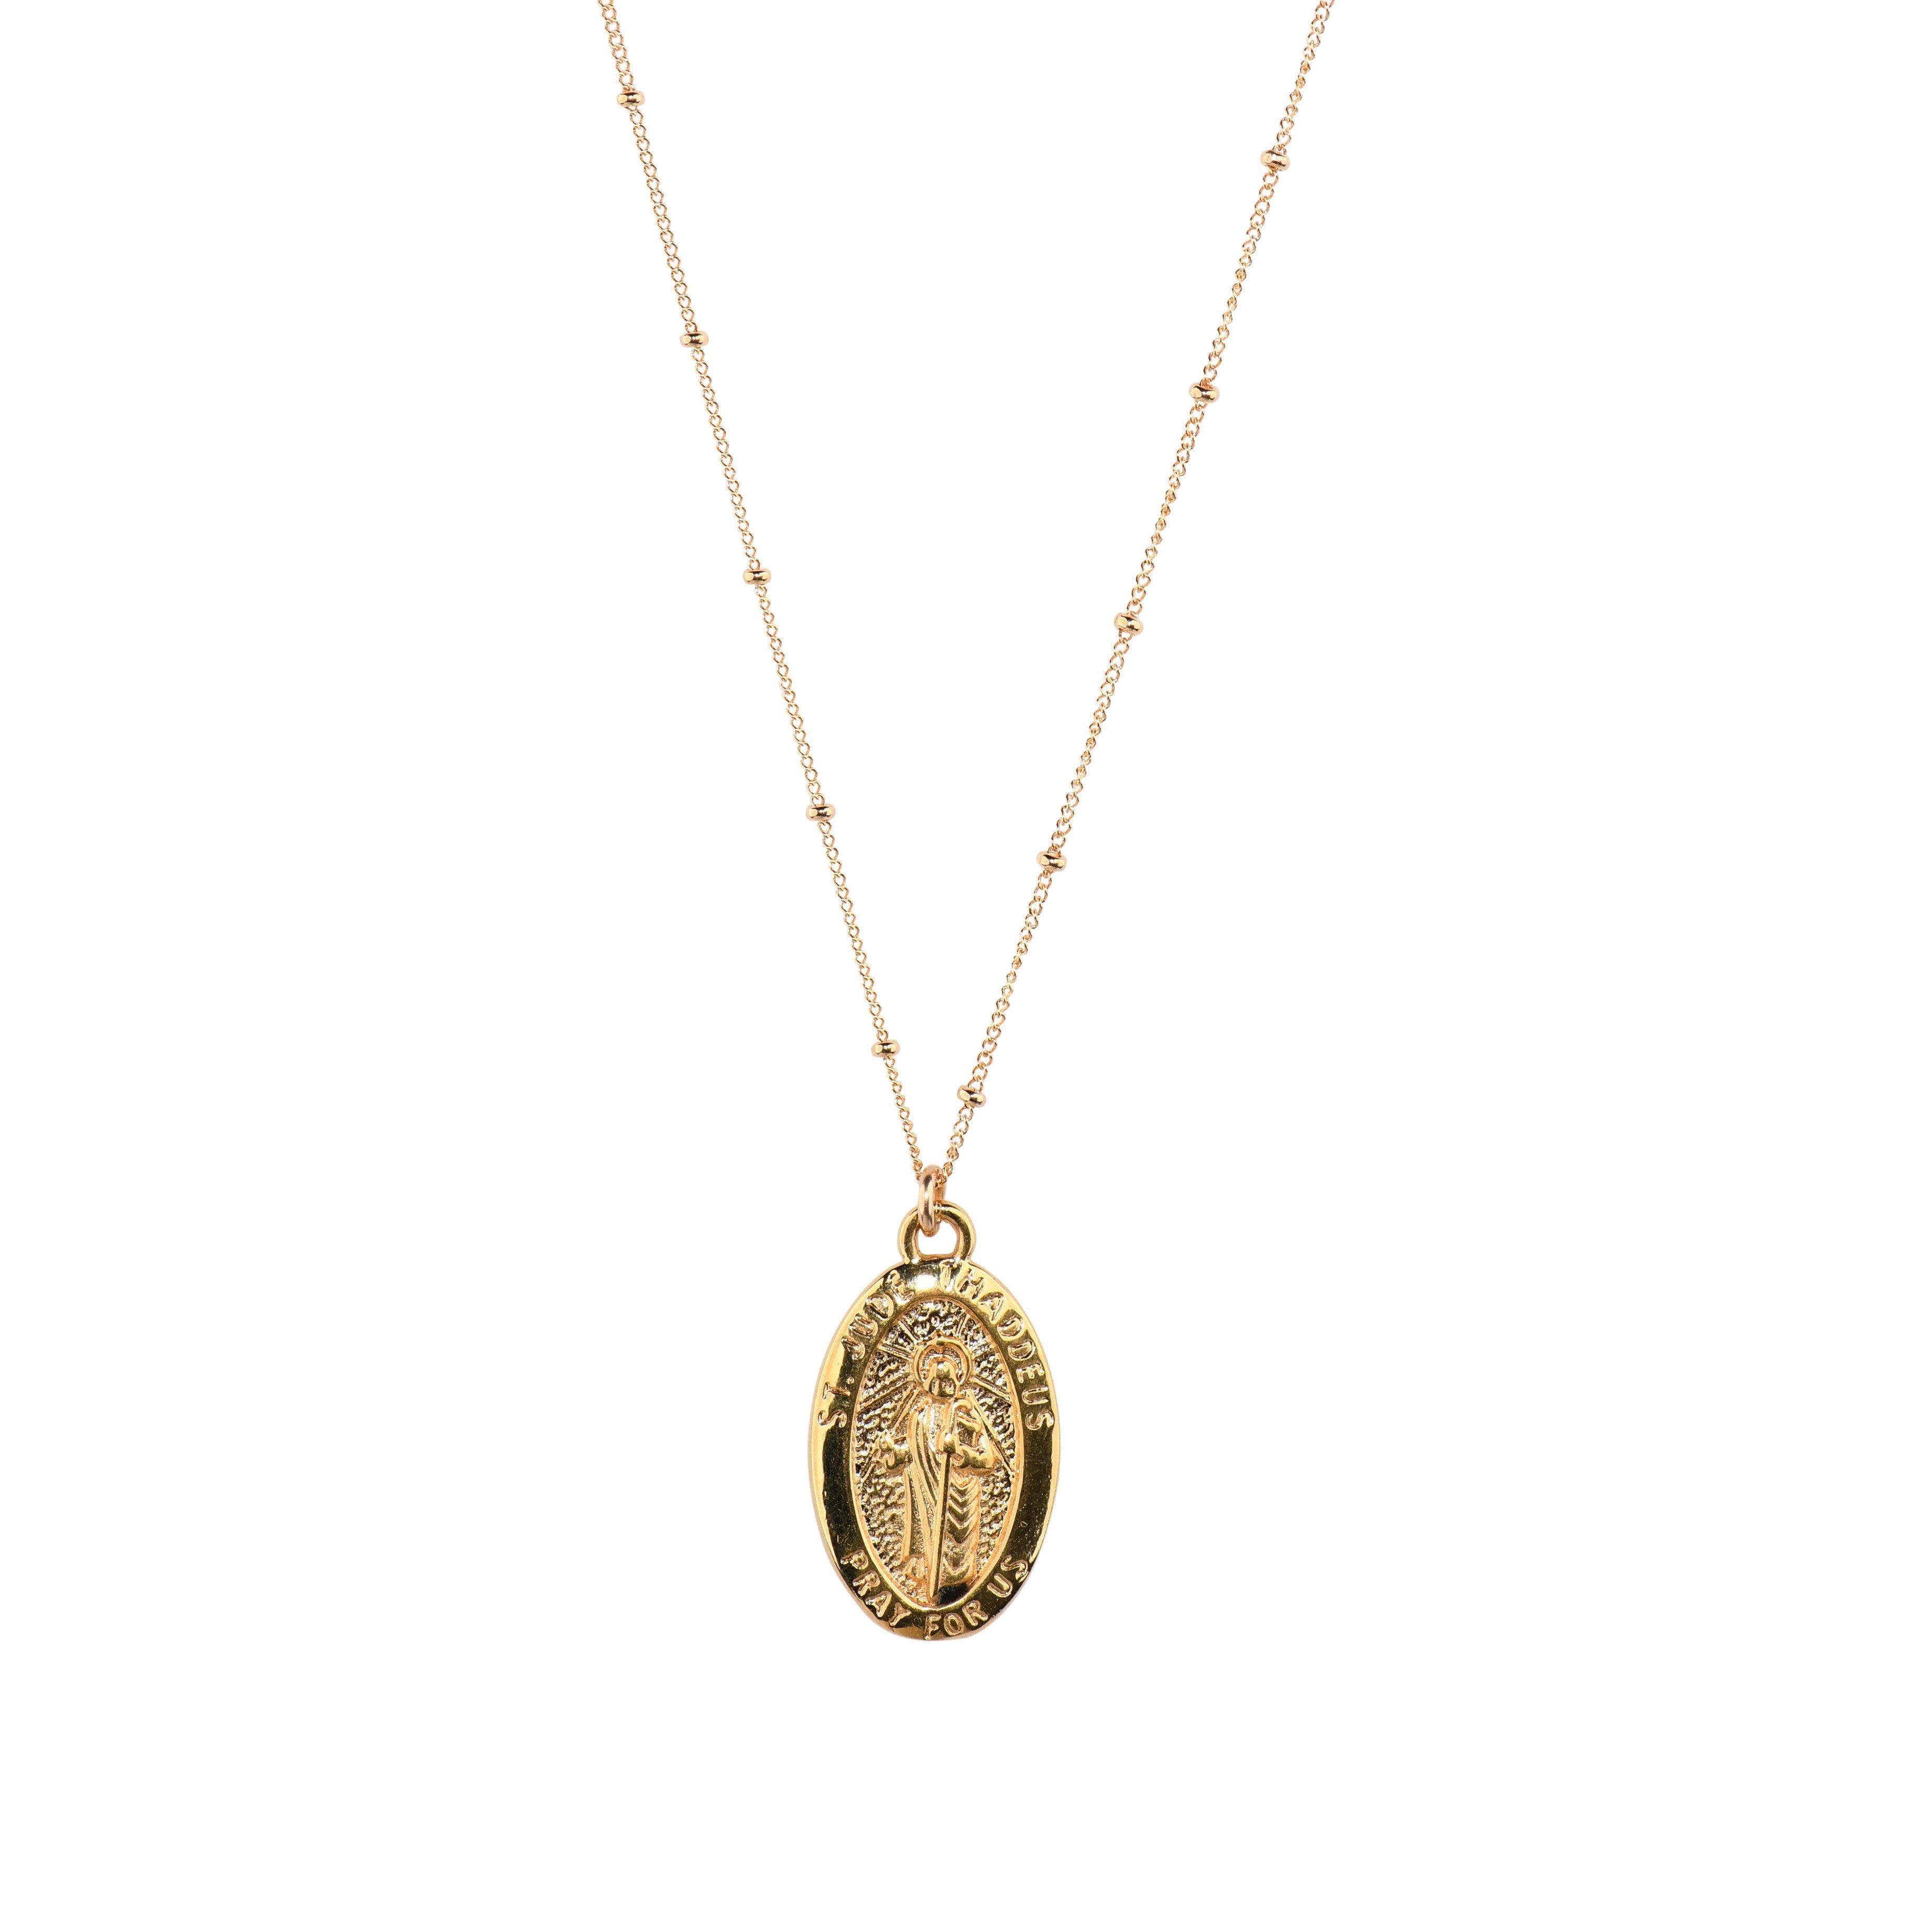 Luxury Gold Plated St. Jude Angel Pendant Necklace With Shiny Cubic  Zirconia Classic Religious Characters Jewelry For Men And Women From Wranp,  $6.52 | DHgate.Com